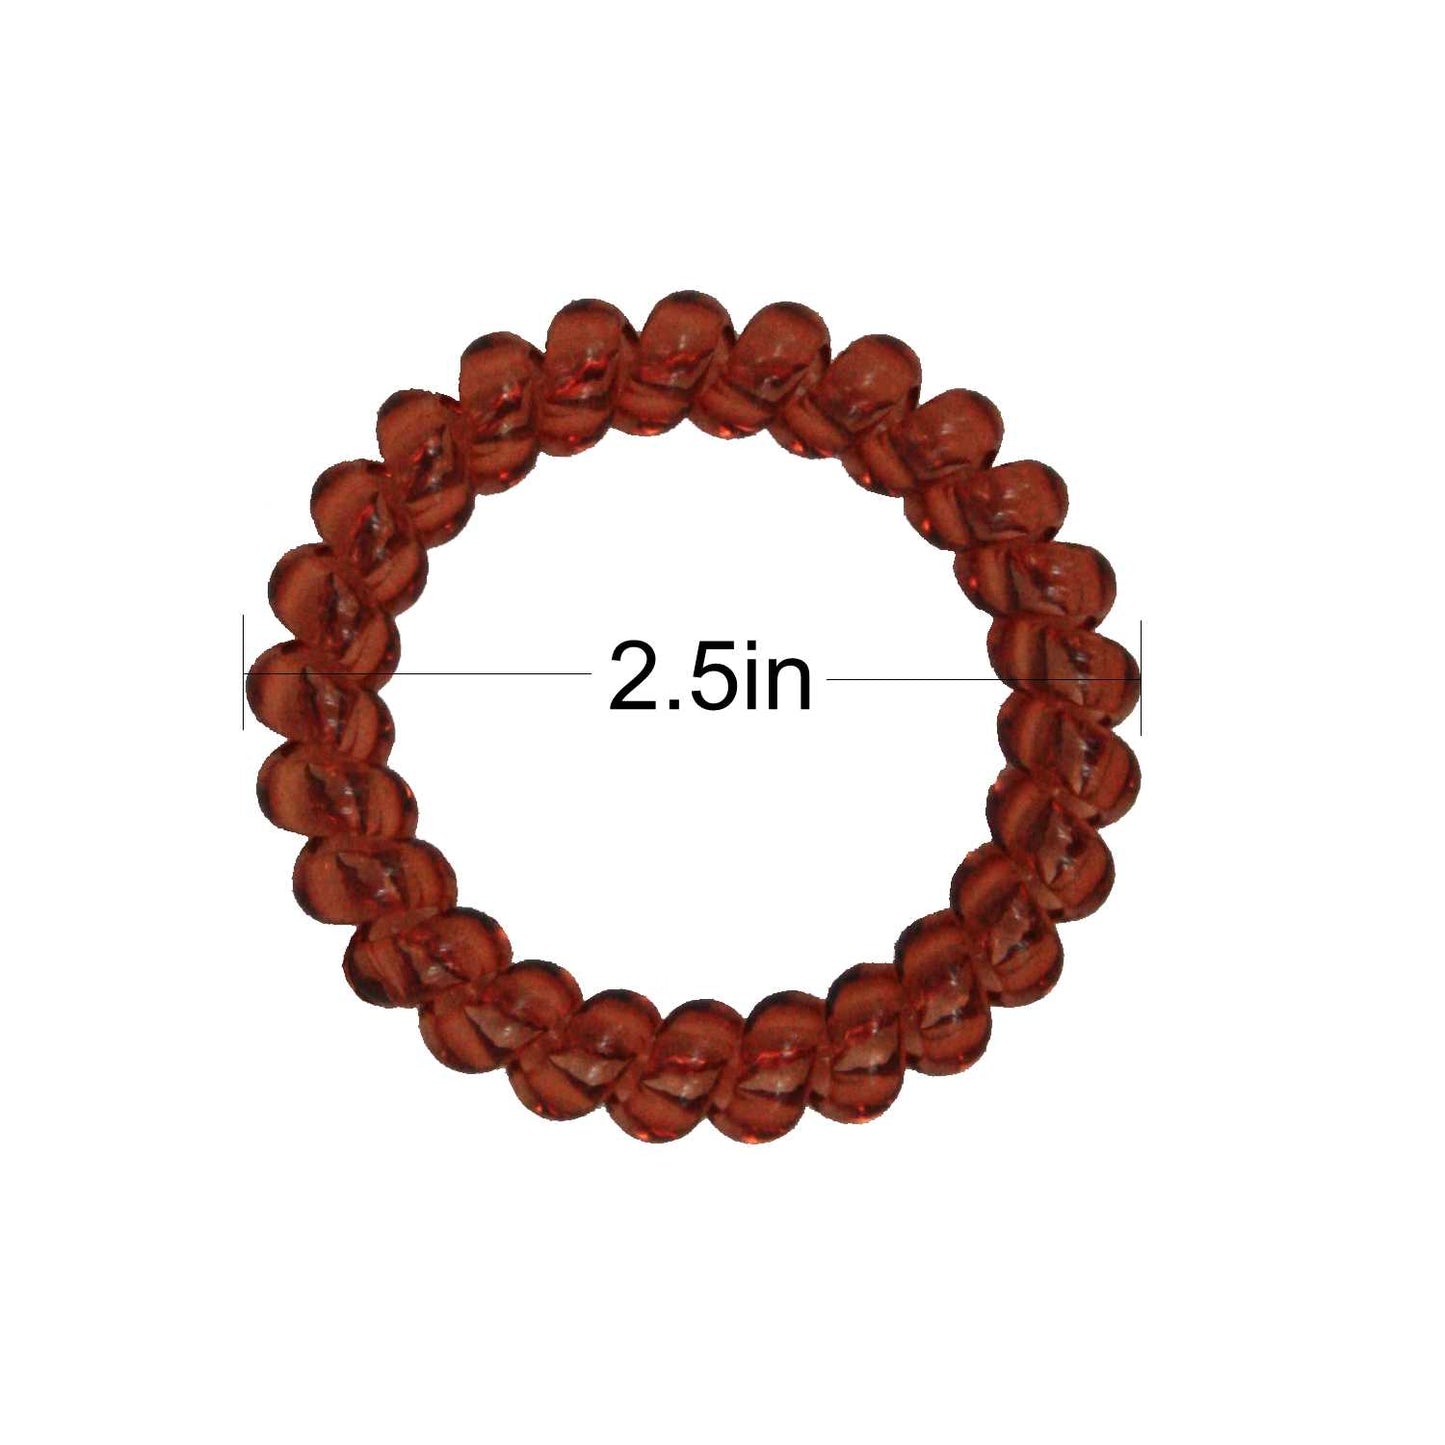 Amelia Beauty Products 8 Large Smooth Elastic Hair Coils, 2. 5in Diameter Thick Spiral Hair Ties, Gentle on Hair, Strong Hold and Minimizes Dents and Creases, Clear and Brown